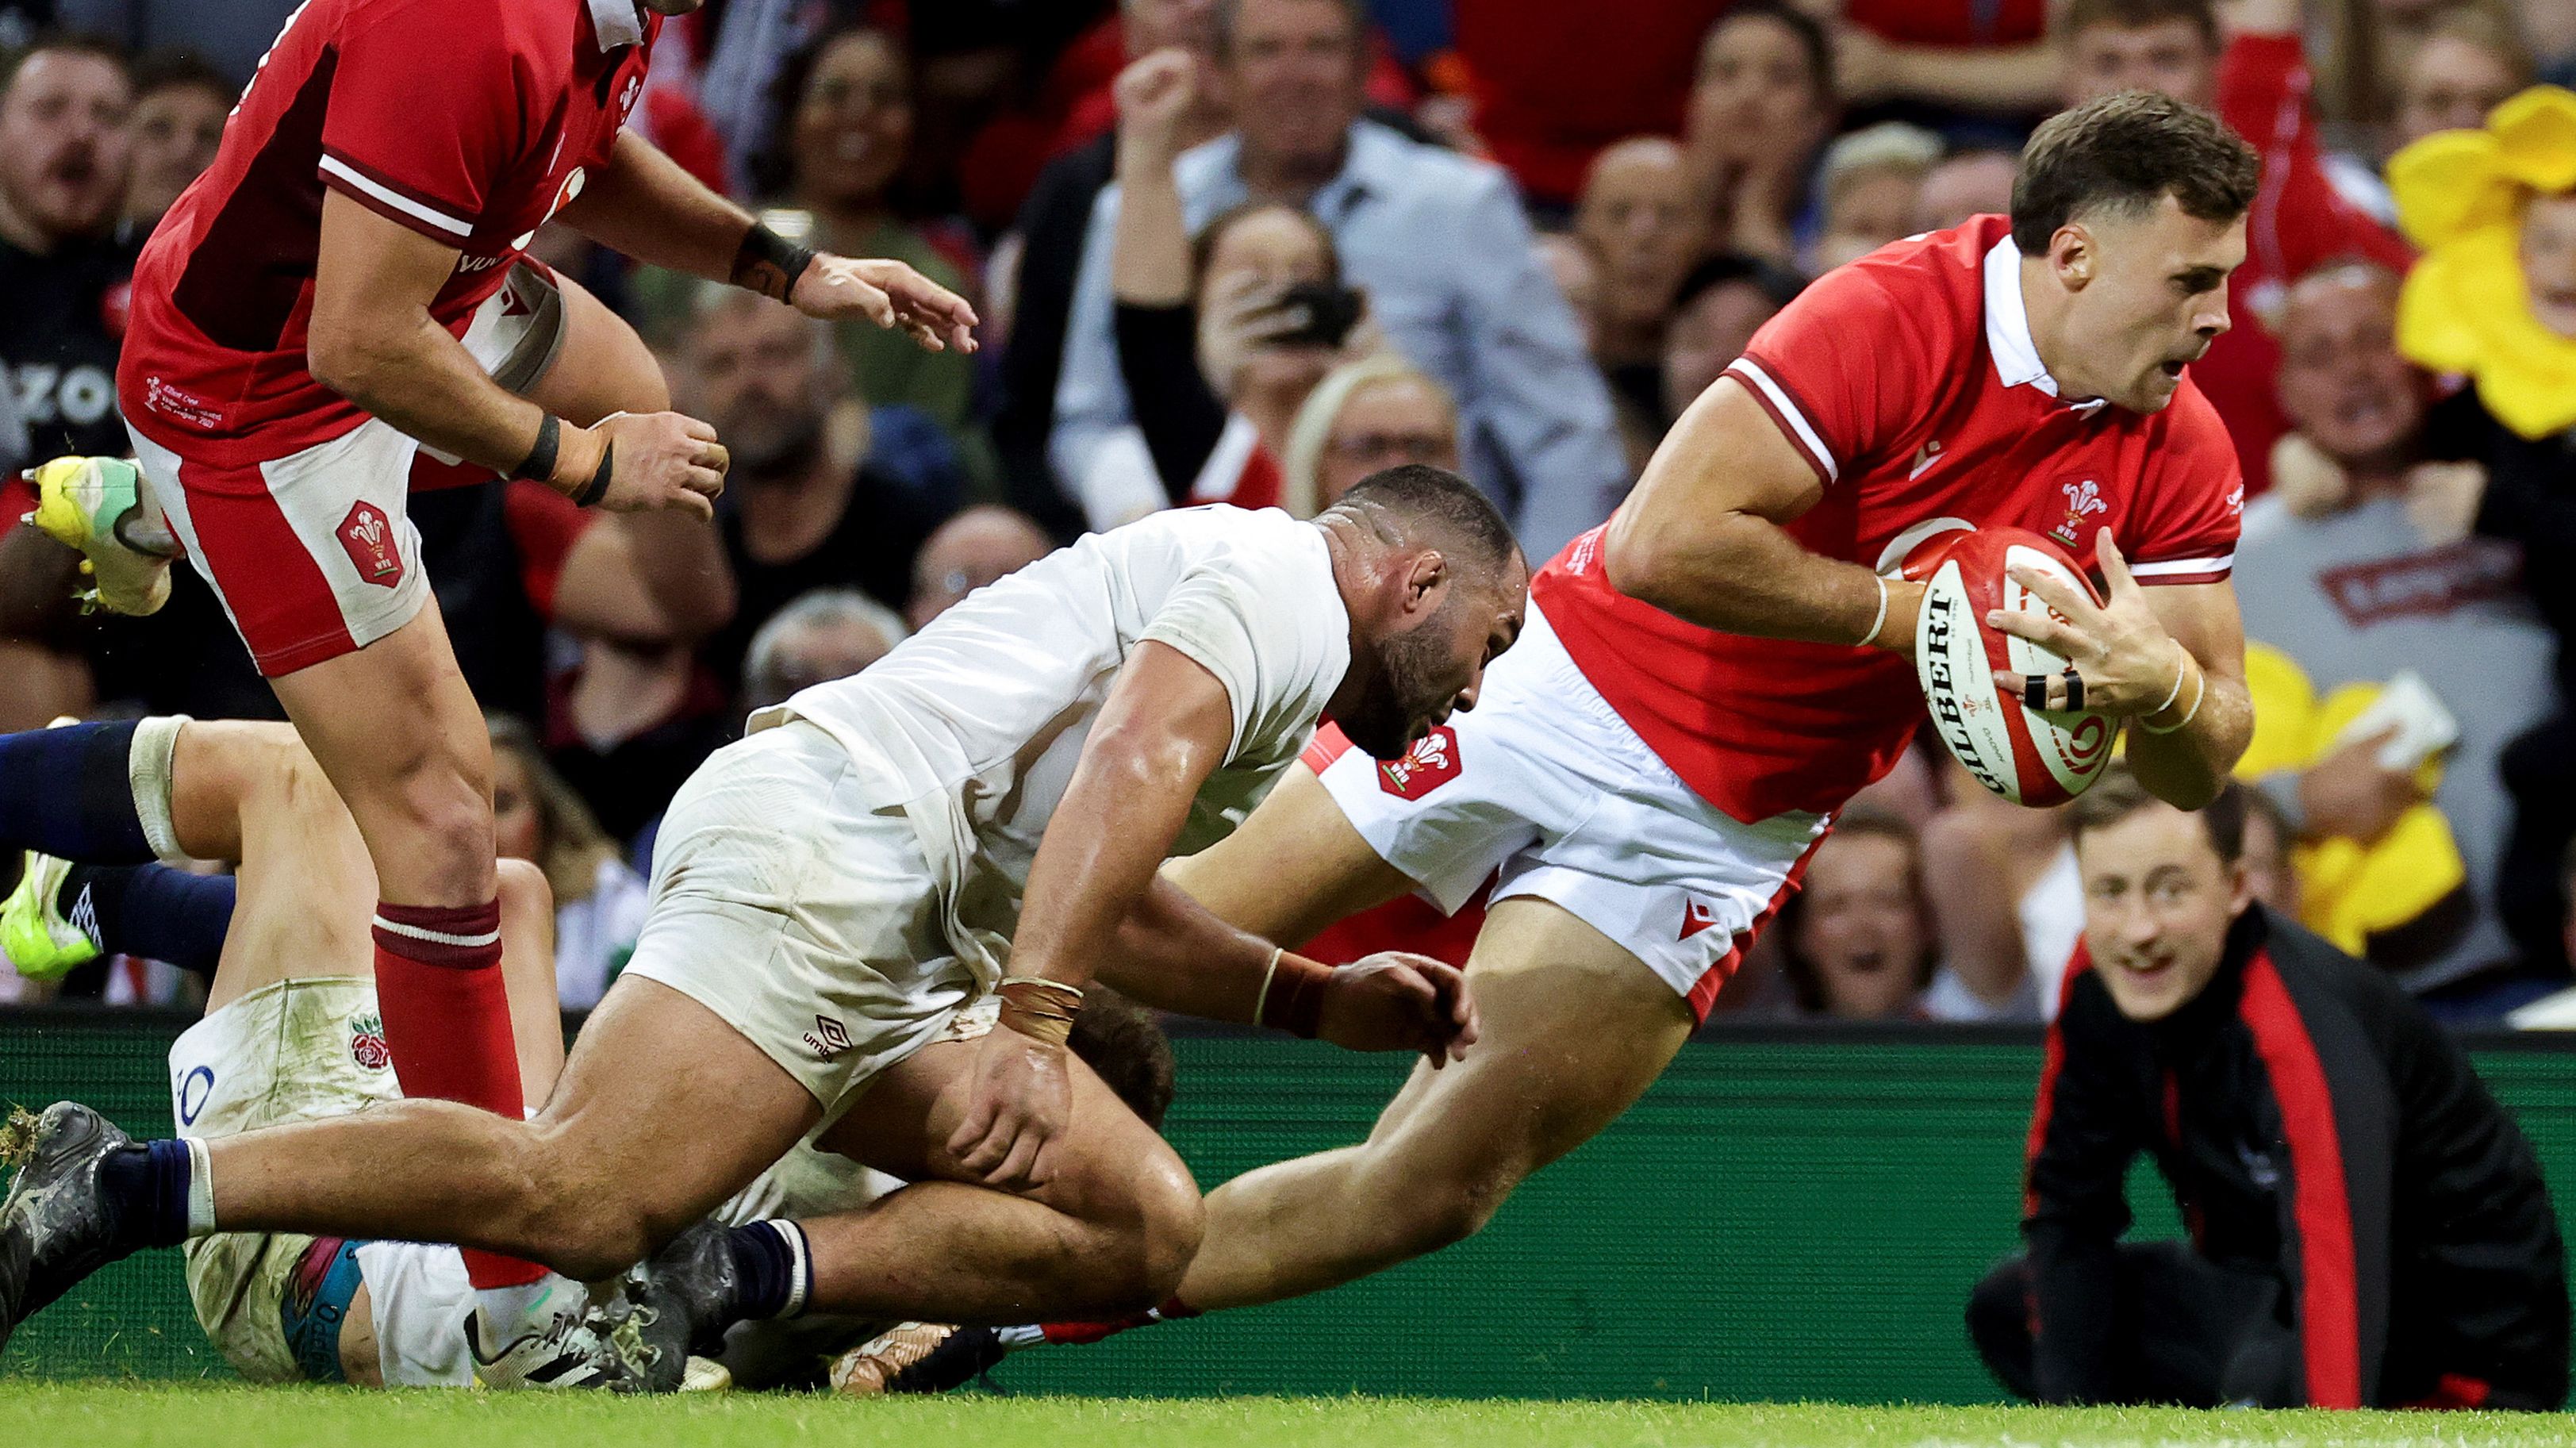 Mason Grady of Wales is tackled by Ellis Genge of England at Principality Stadium in Cardiff, Wales.